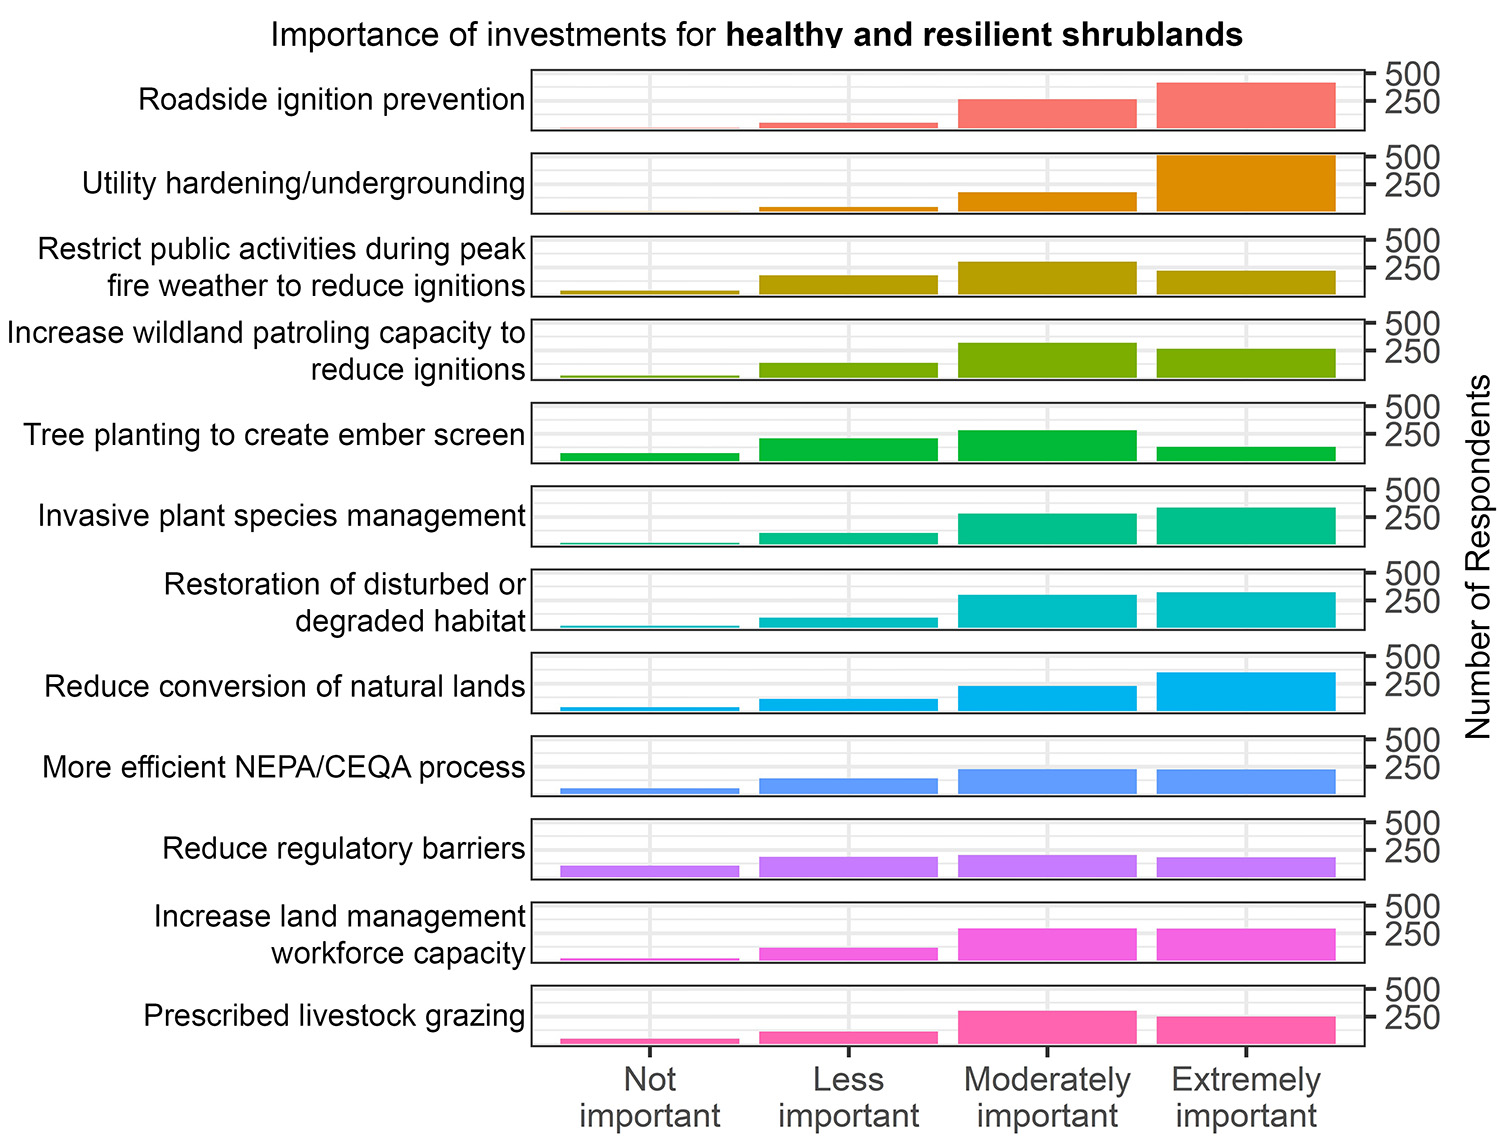 Importance of Investments for Healthy and Resilient Shrublands Histogram